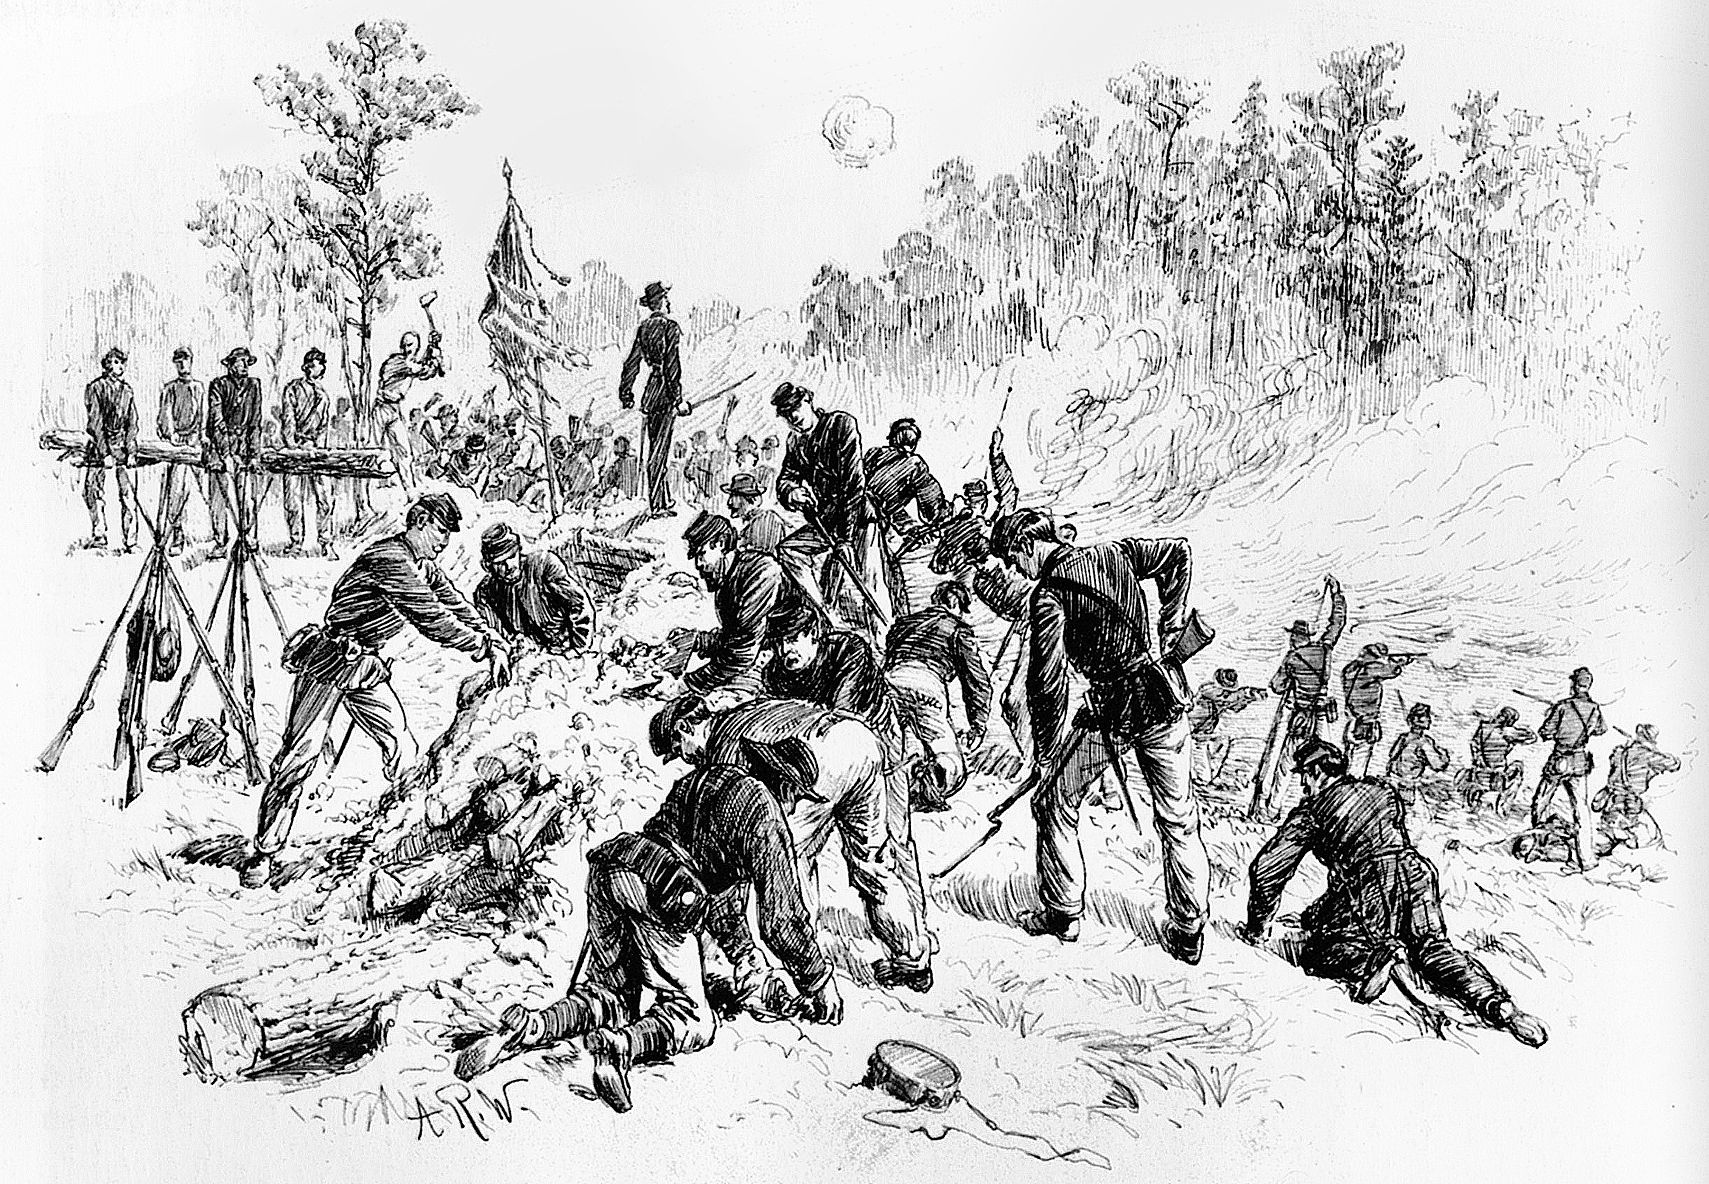 Soldiers of Major General Winfield Scott Hancock’s II Corps dig frantically with bayonets, tin plates, and bare hands to create earthworks before a Confederate countercharge.